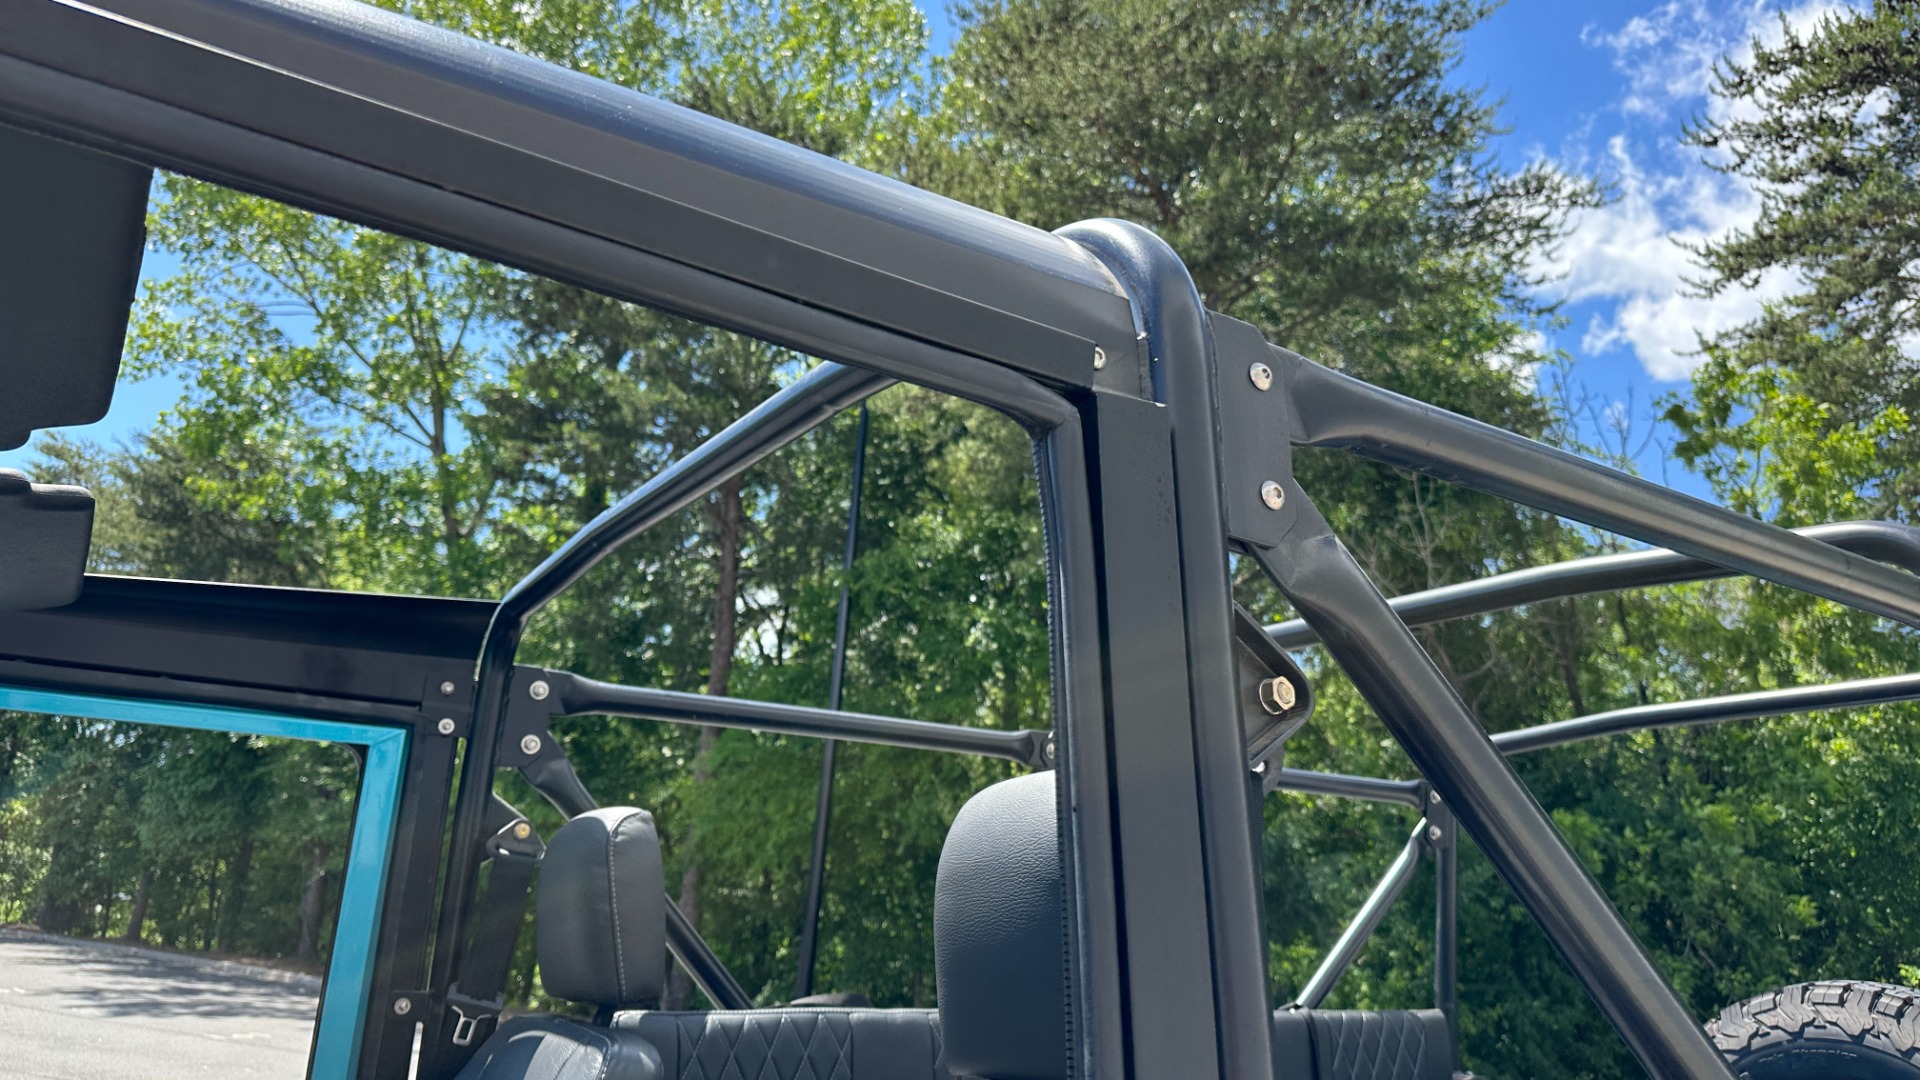 Used 1994 Land Rover Defender 110 CUSTOM BUILD / REBUILT POWERTRAIN / TDI300 DIESEL / 5SPD / BENCH SEATS for sale $81,995 at Formula Imports in Charlotte NC 28227 26